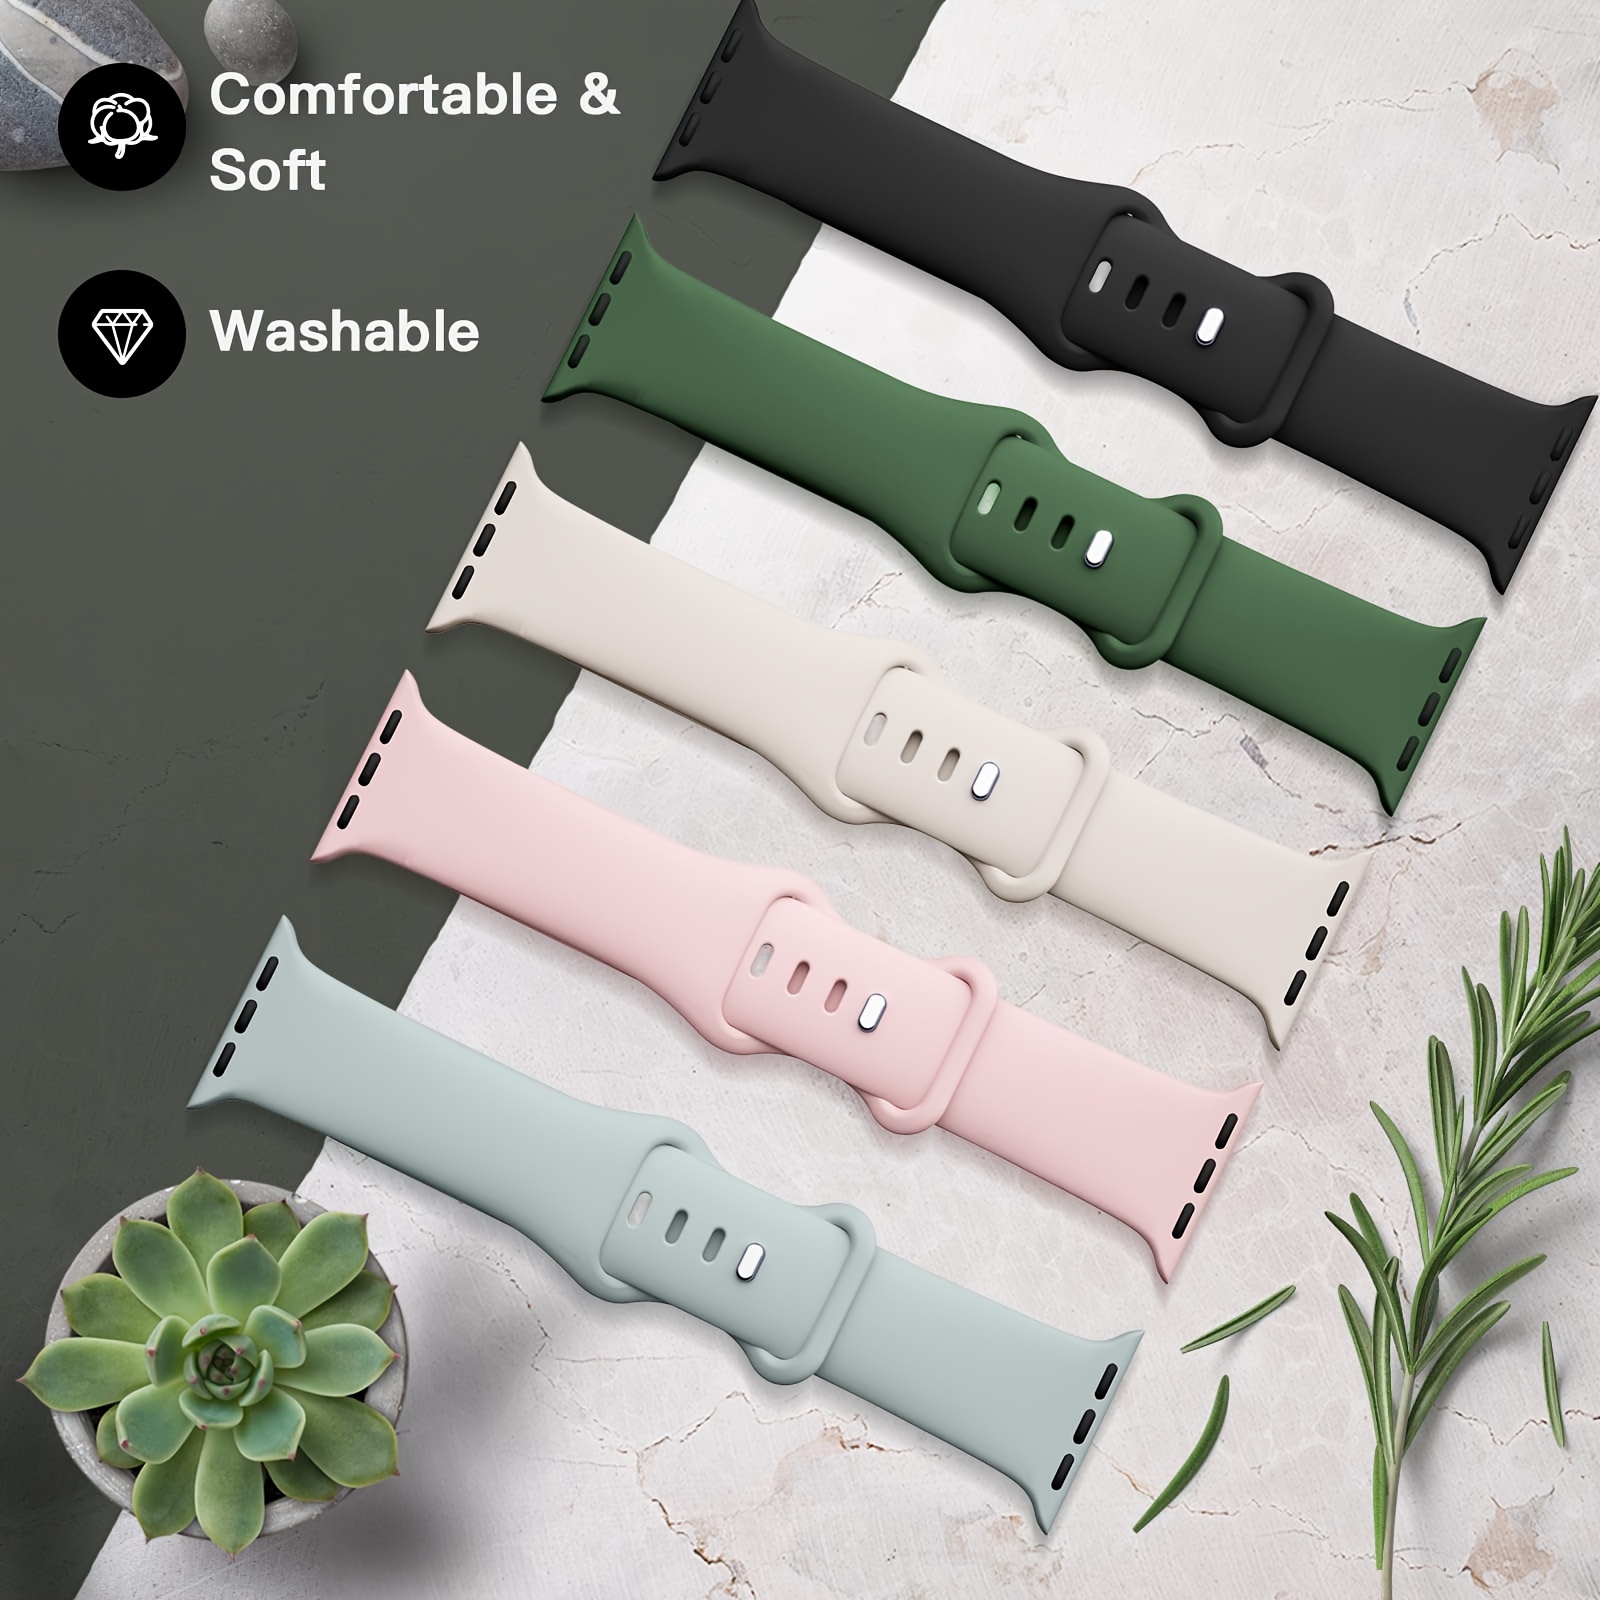 

5-piece Soft Silicone Sport Bands For Watch - Waterproof, Adjustable Straps Compatible With Iwatch Series 9/ultra/8/se/7/6/5/4/3, Fits 38mm To 49mm - Perfect Gift For Men & Women